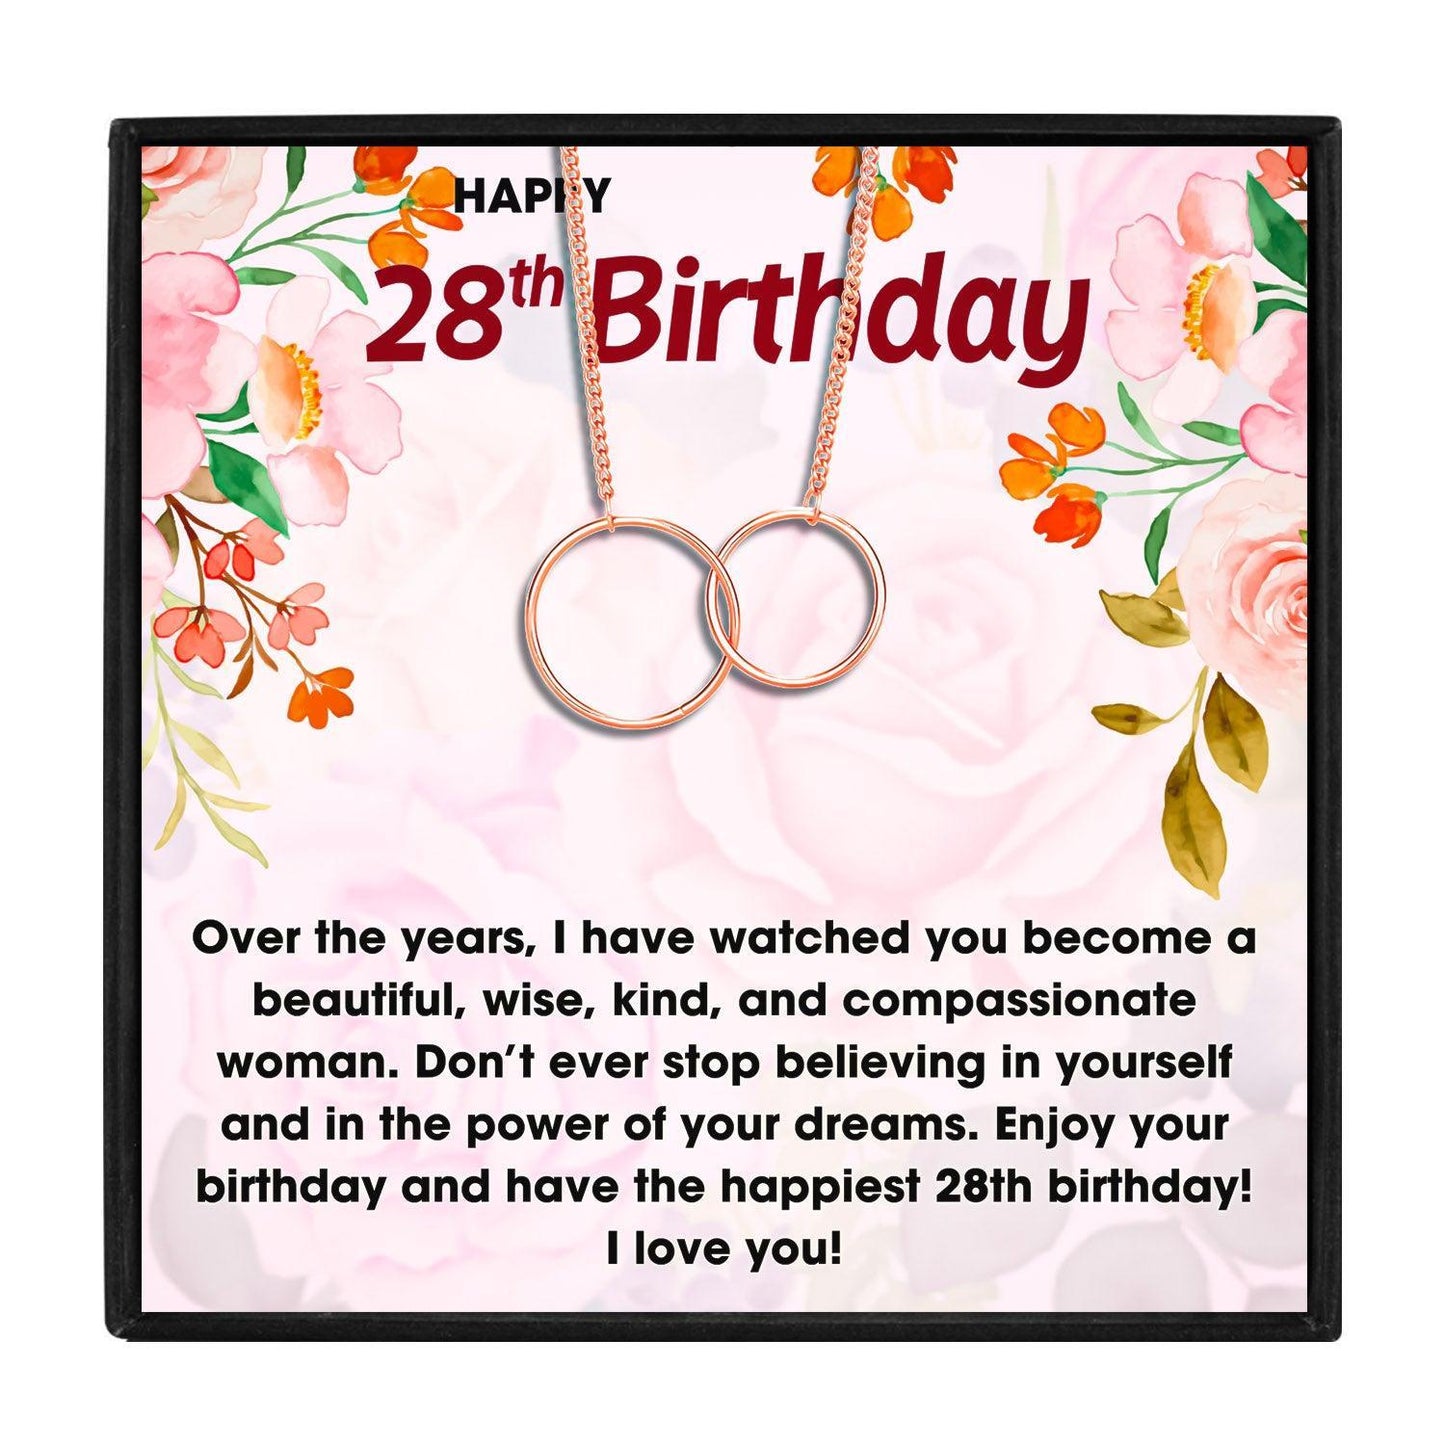 28th Birthday Gift Ideas For Her in 2023 | 28th Birthday Gift Ideas For Her - undefined | 28 birthday gift, 28th birthday ideas for her, 28th birthday present ideas for her, birthday ideas for 28 | From Hunny Life | hunnylife.com